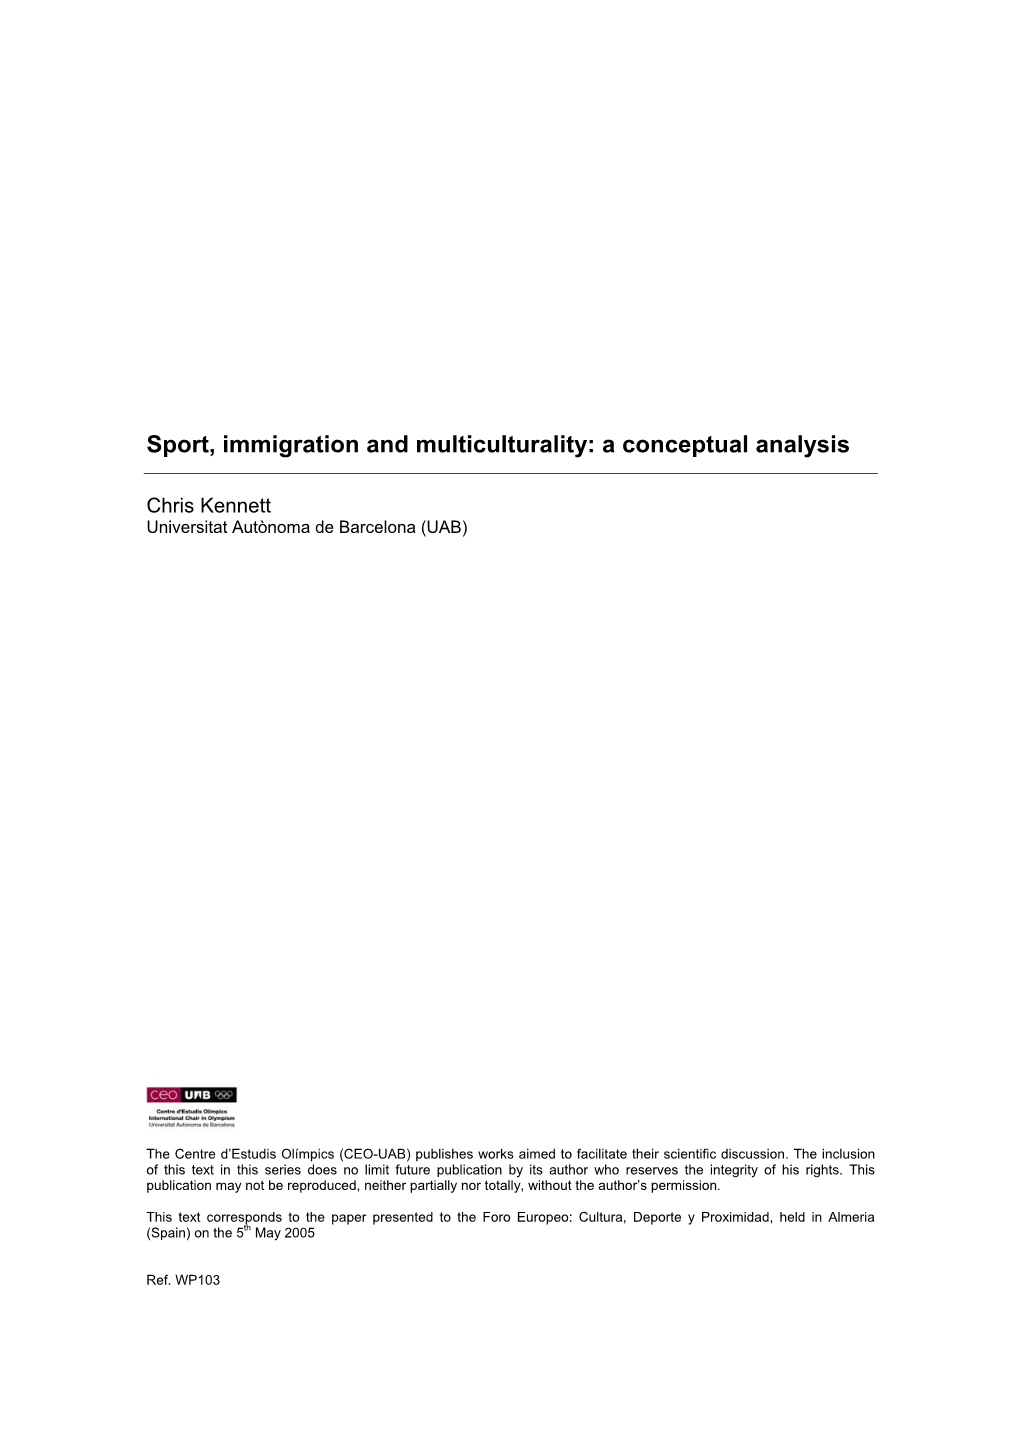 Sport, Immigration and Multiculturality: a Conceptual Analysis